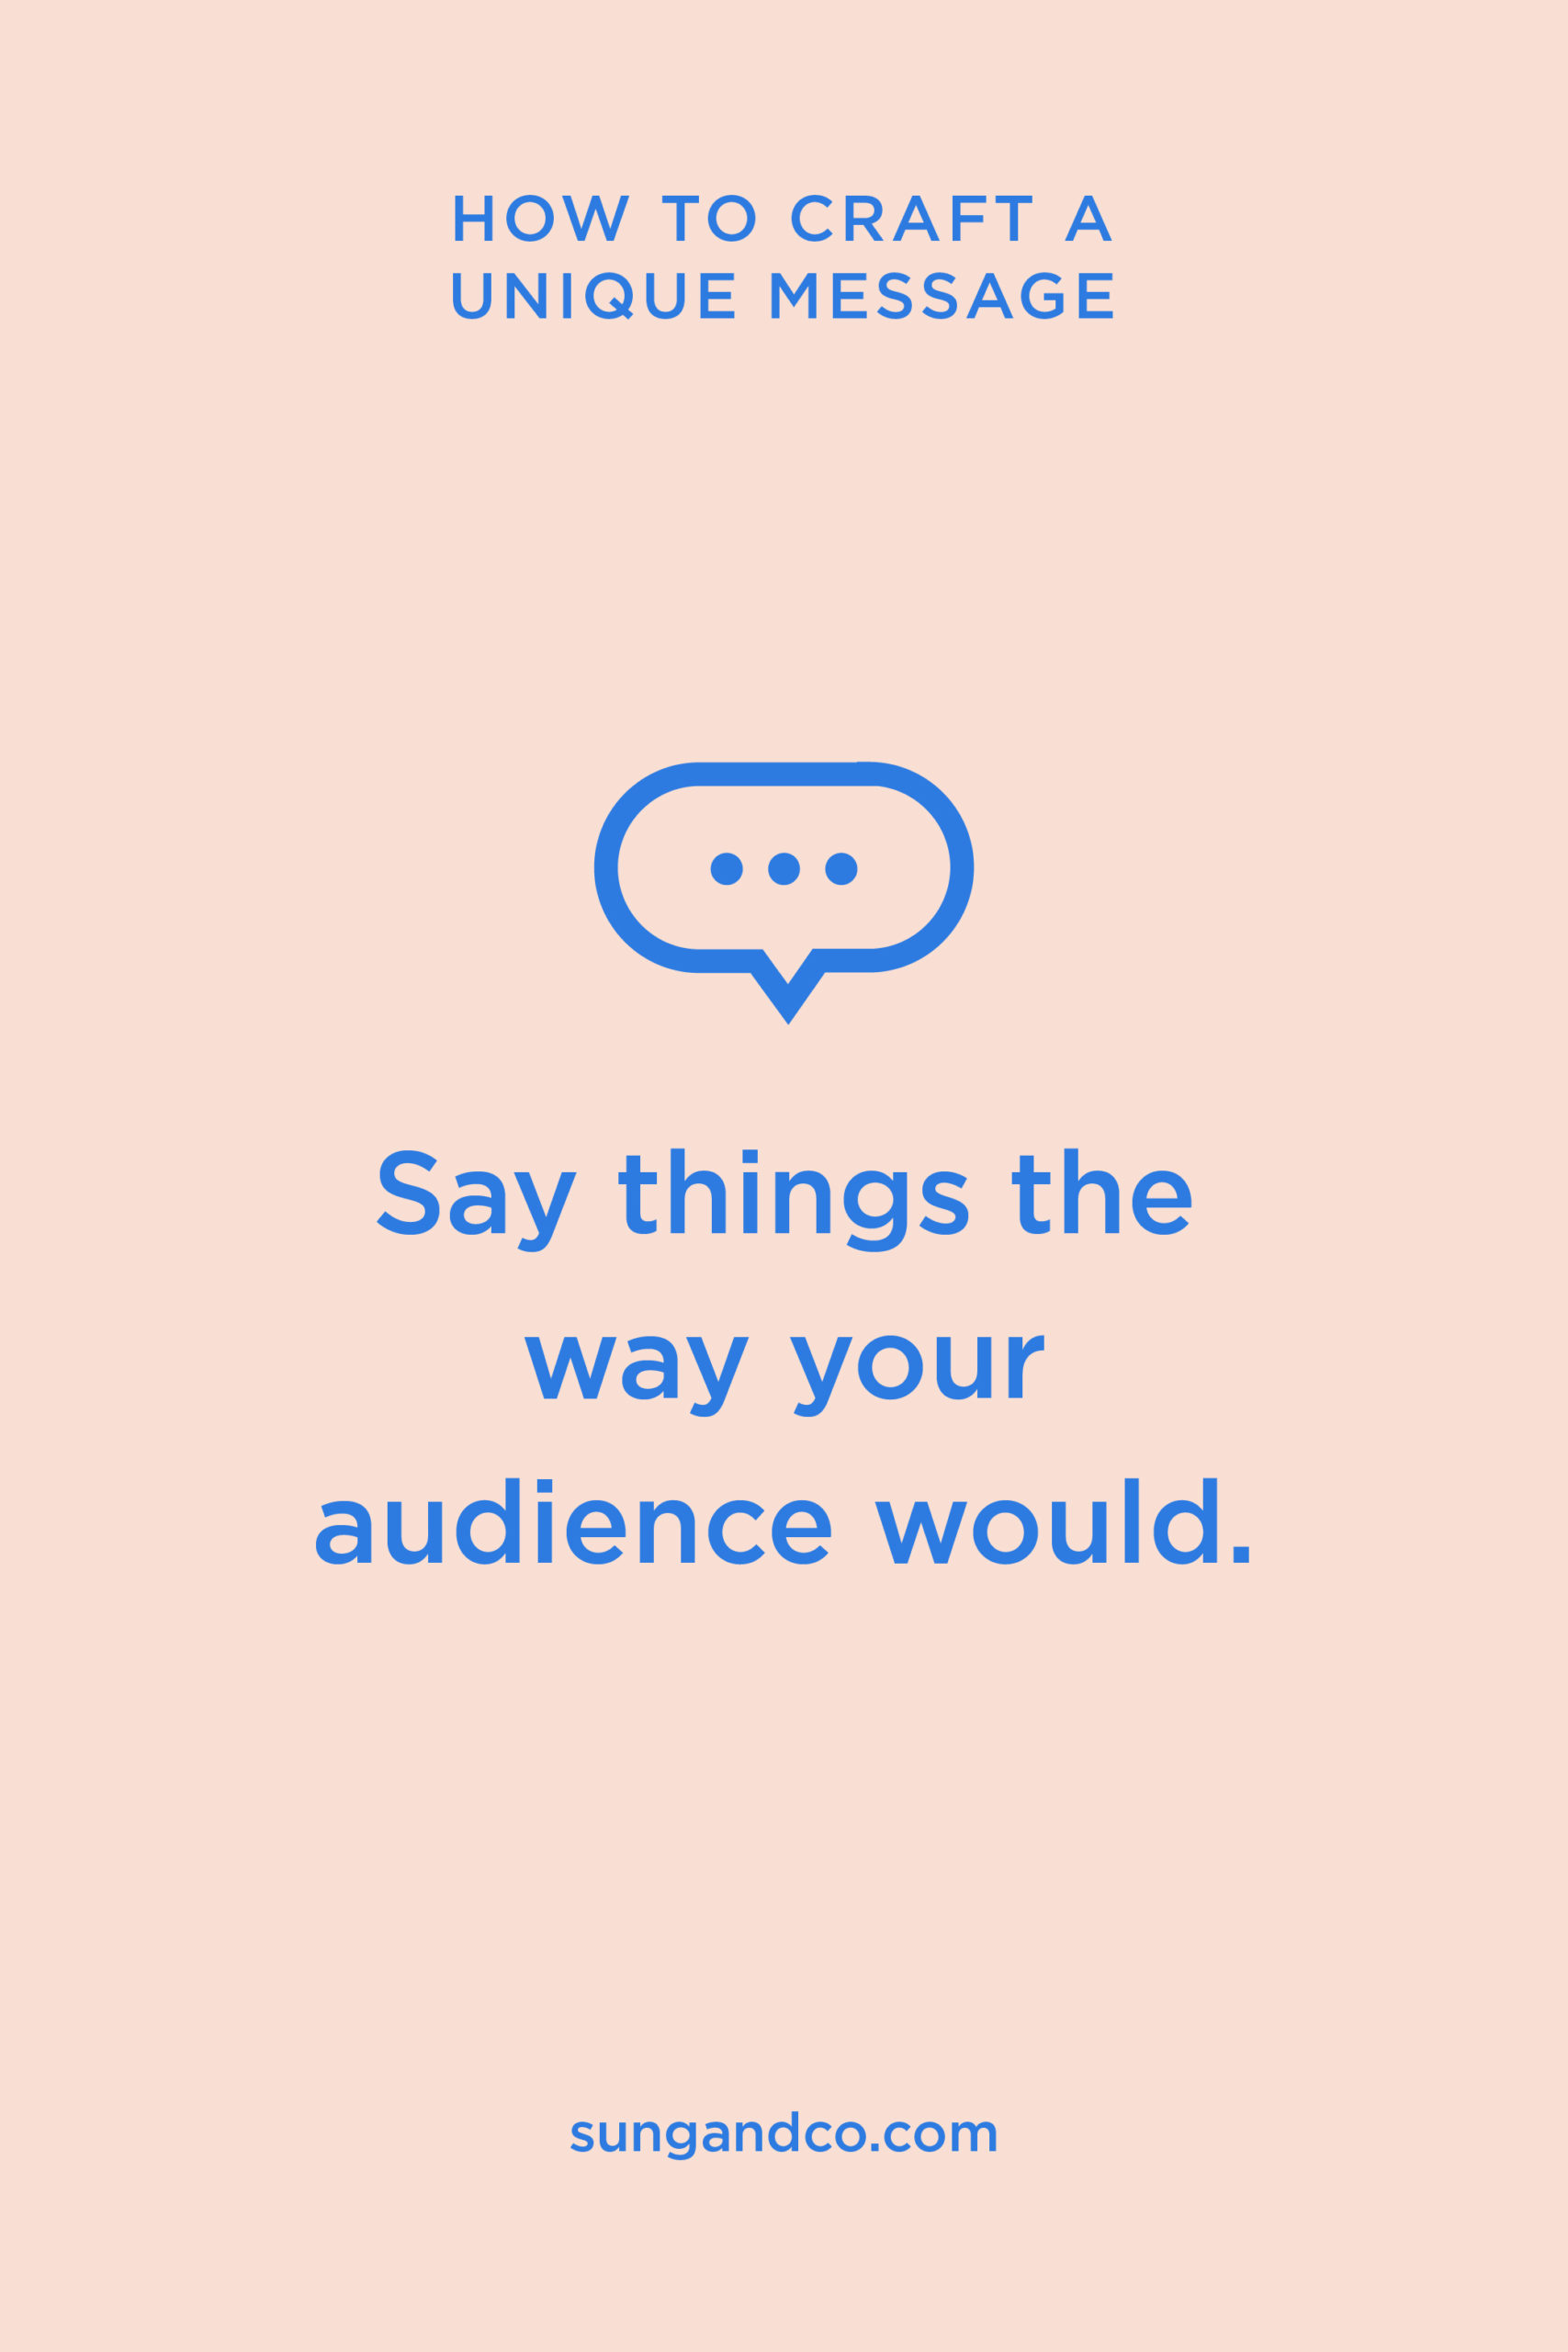 Say things the way your audience would.